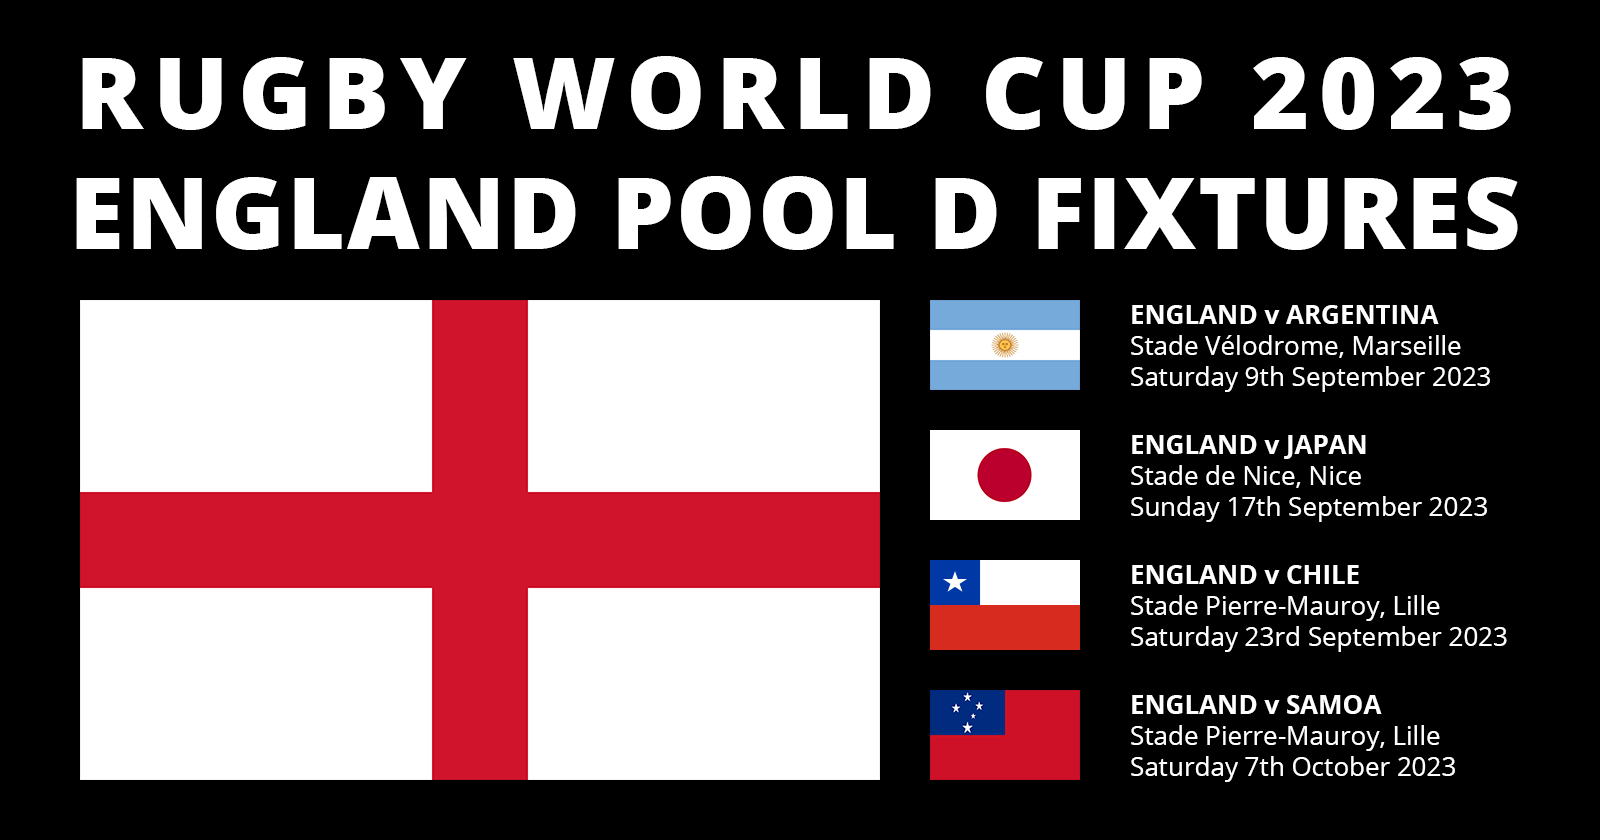 England Rugby World Cup 2023 Fixtures